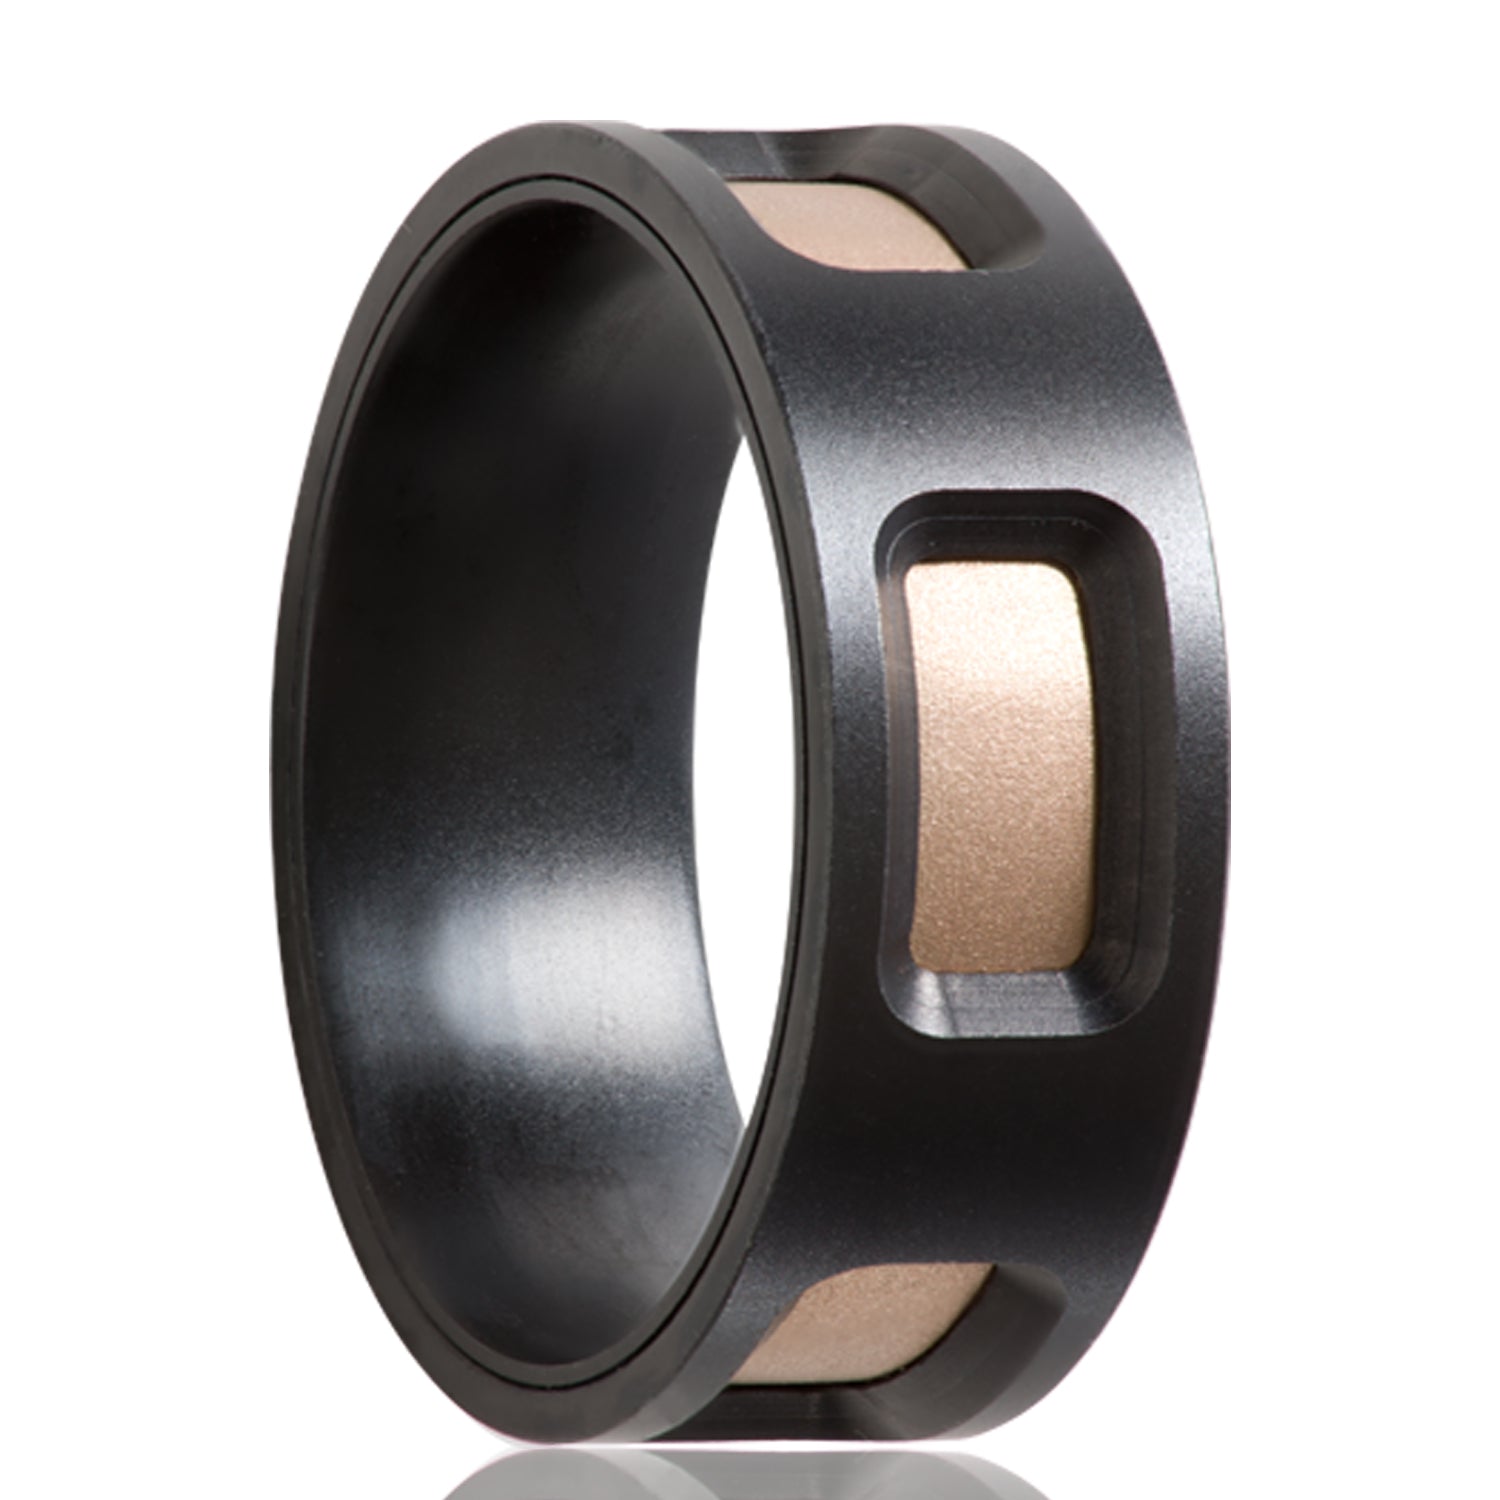 A 14k rose gold inlay zirconium men's wedding band displayed on a neutral white background.